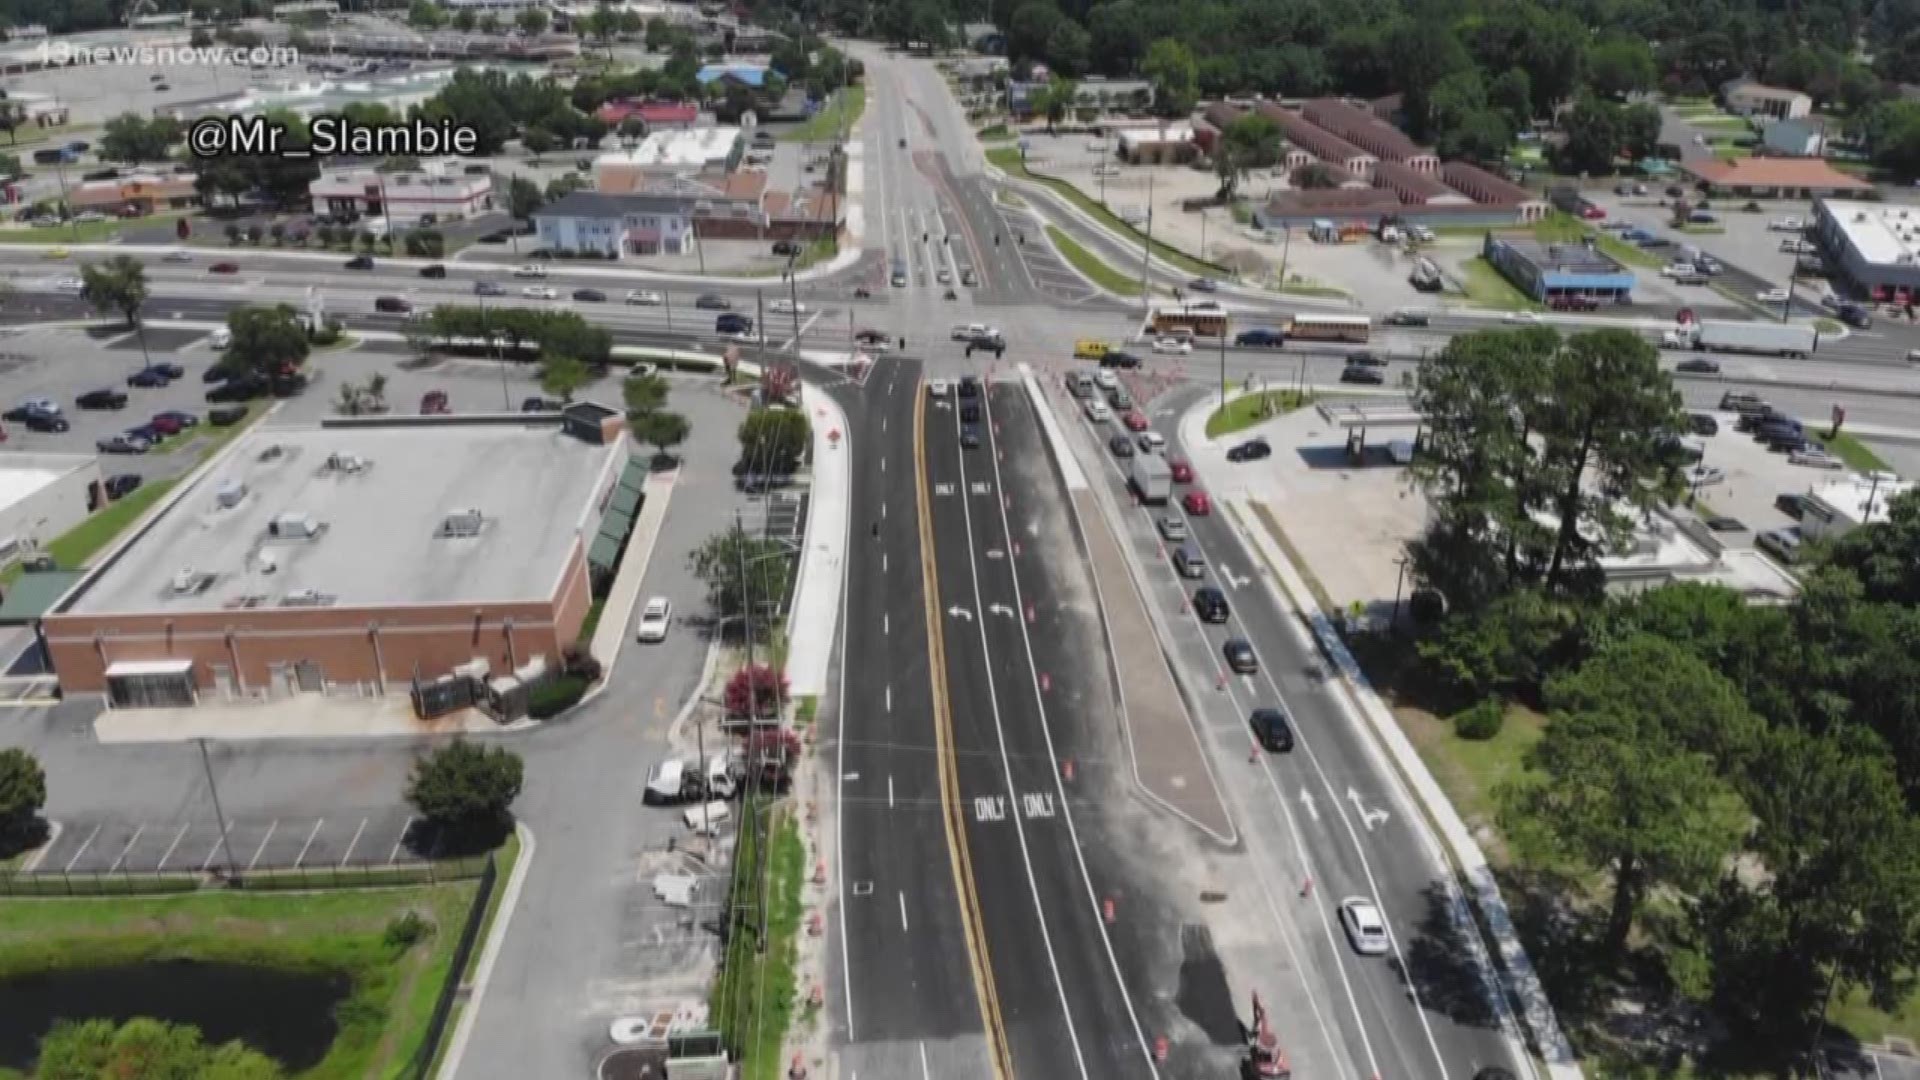 Indian River Road and Kempsville Road is the busiest intersection in the city according to officials. Drivers will soon be unable to make a left turn onto Kempsville Road from Indian River Road. The detours are set up as workers construct a new configuration for the intersection.